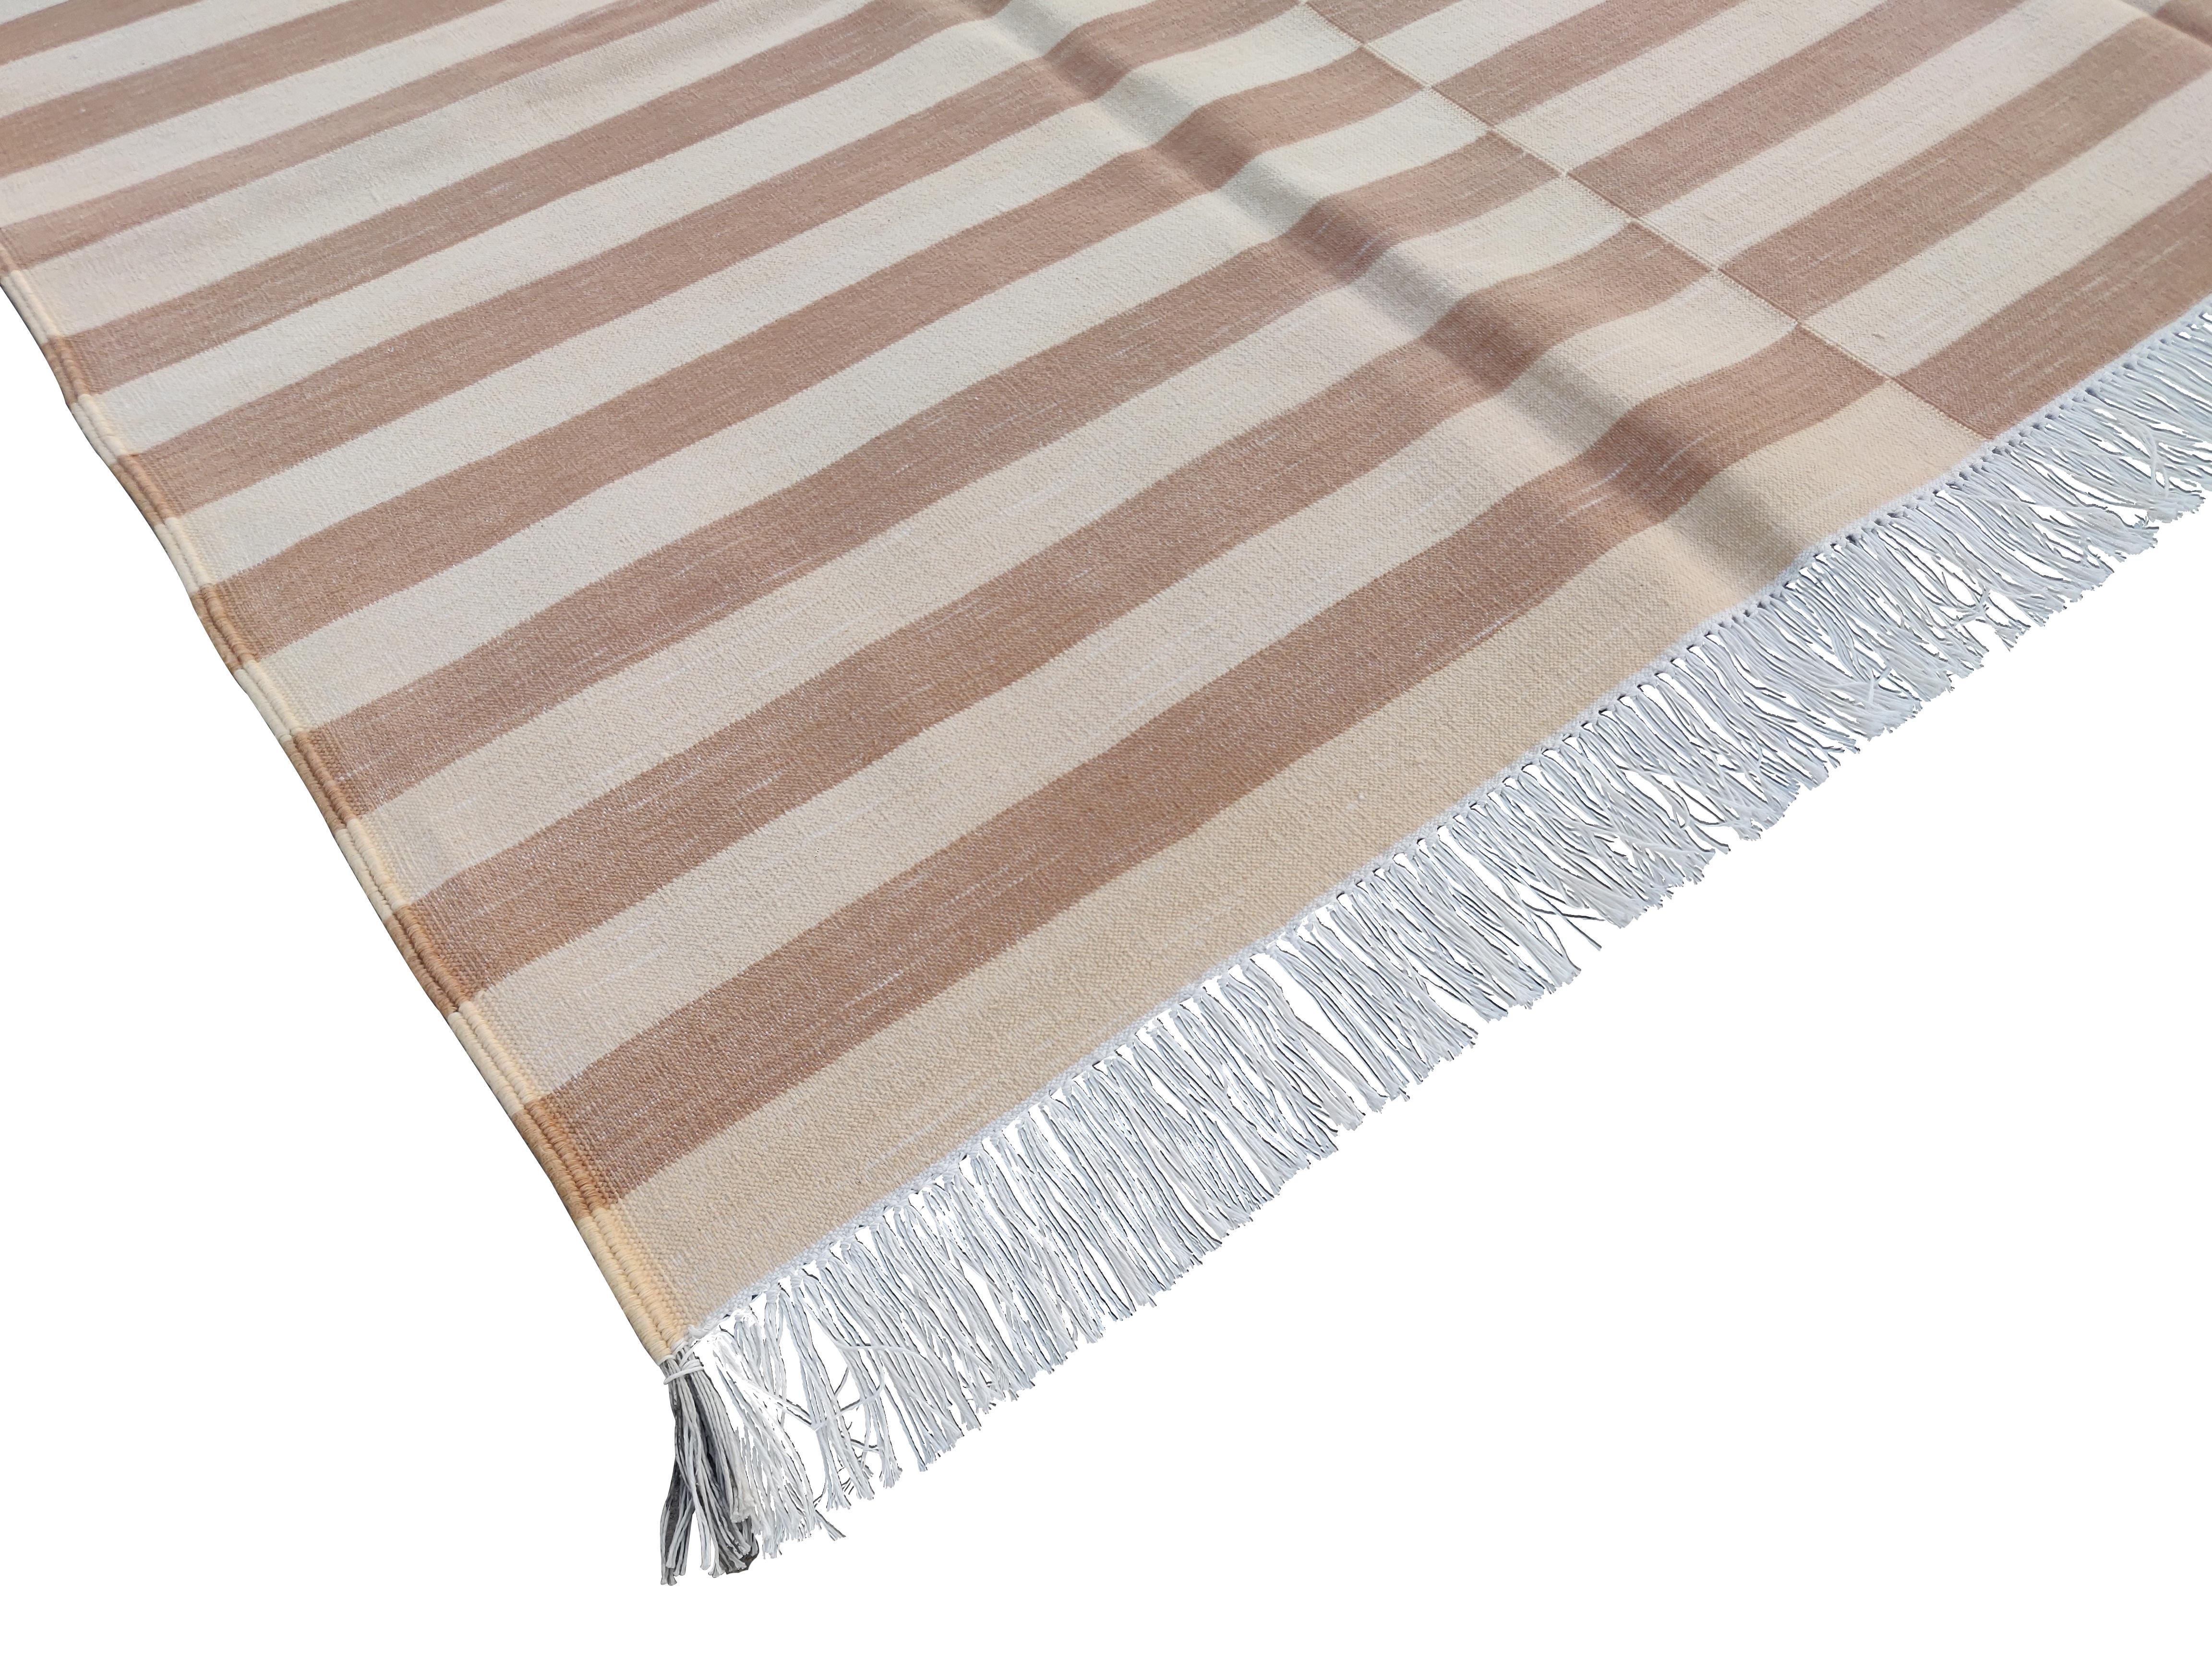 Mid-Century Modern Handmade Cotton Area Flat Weave Rug, 6x9 Tan And Cream Striped Indian Dhurrie For Sale